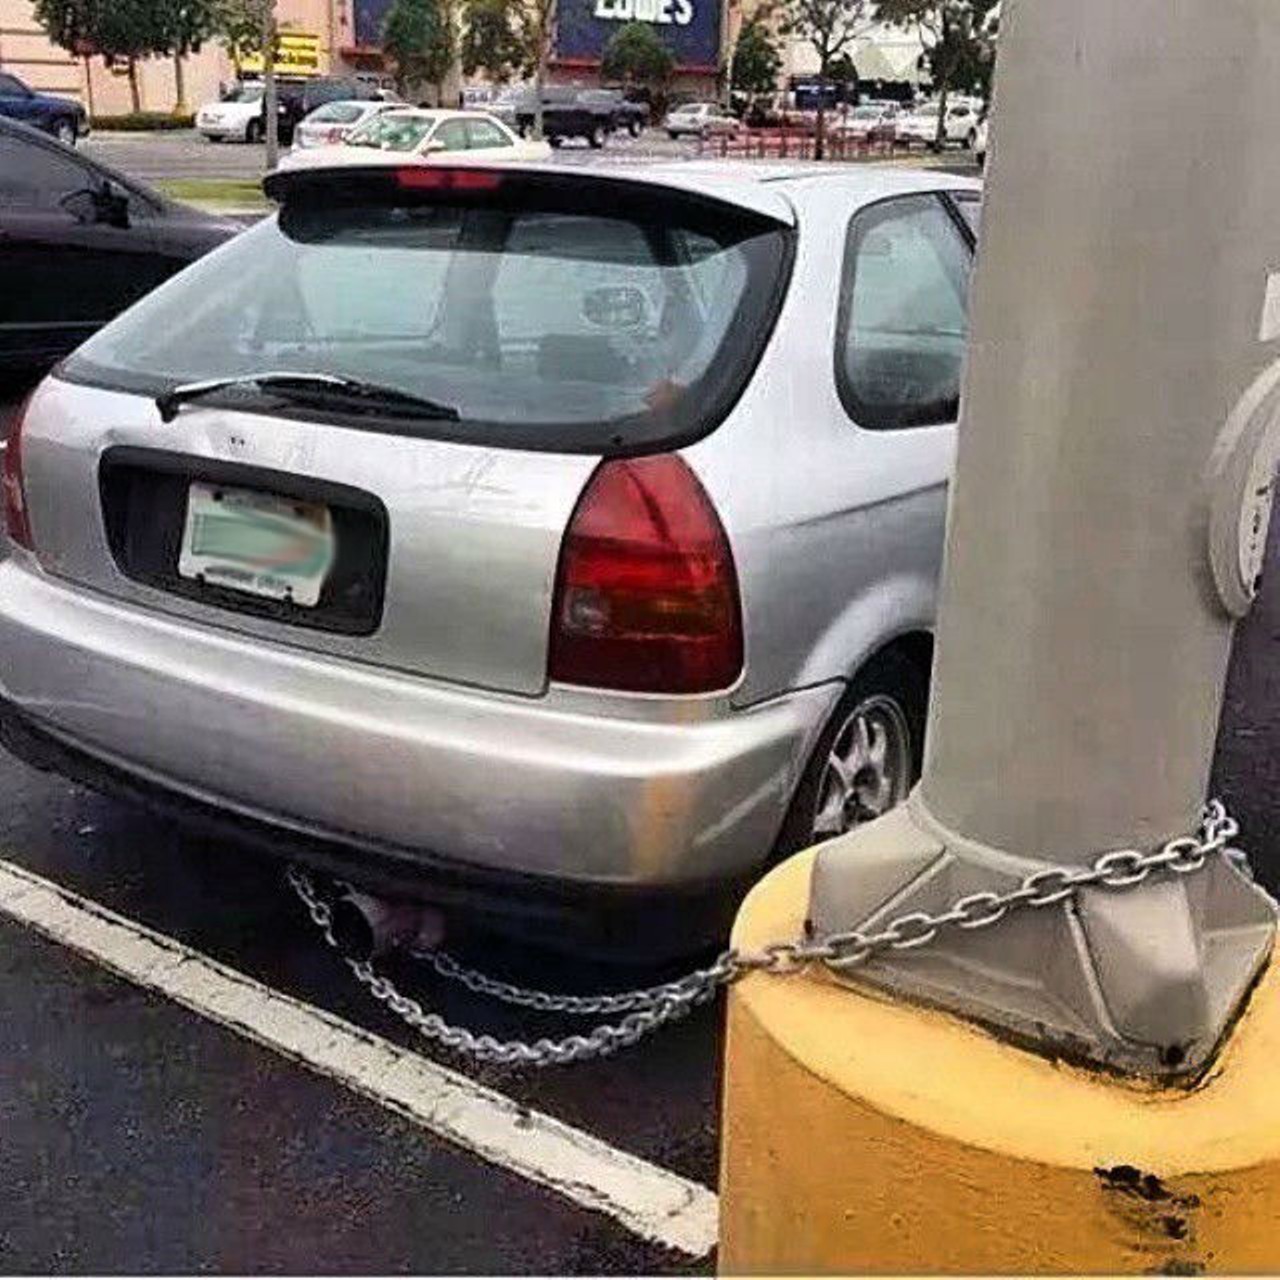 #onlyinorlando does chaining your car to a pole seem like a reasonable way to prevent car theft.  Instagram: vexed_inc